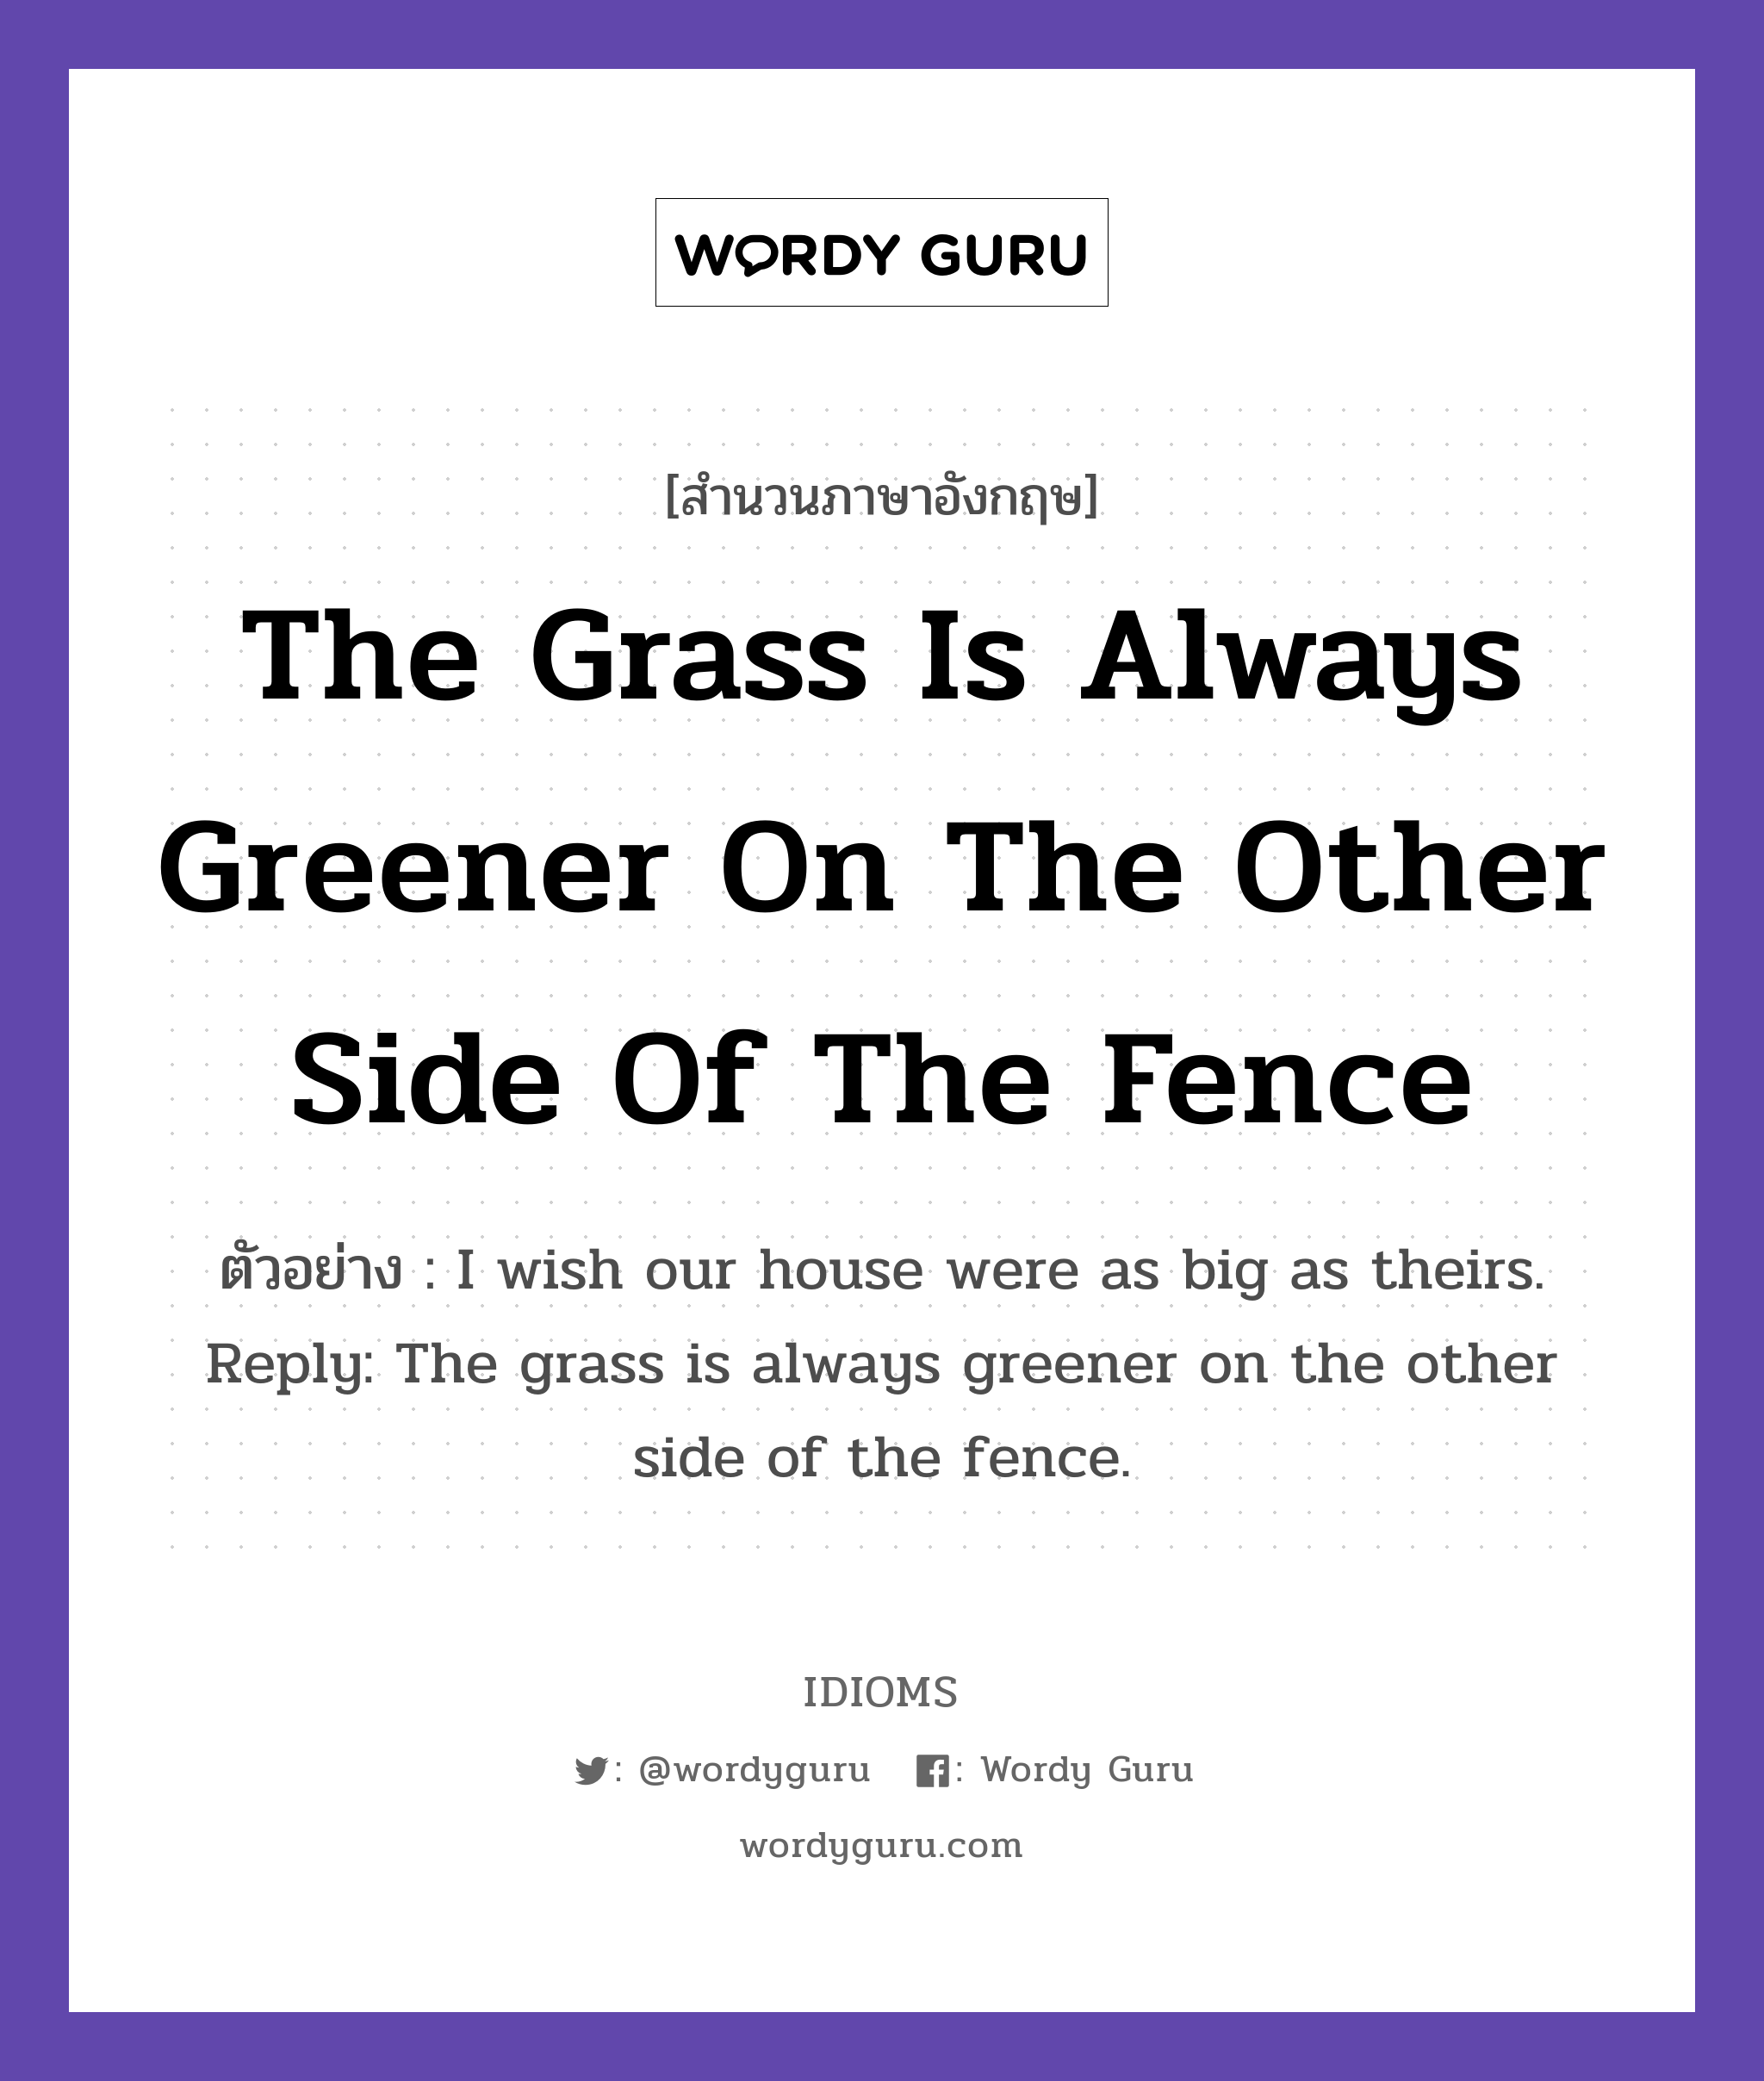 The Grass Is Always Greener On The Other Side Of The Fence แปลว่า?, สำนวนภาษาอังกฤษ The Grass Is Always Greener On The Other Side Of The Fence ตัวอย่าง I wish our house were as big as theirs. Reply: The grass is always greener on the other side of the fence.